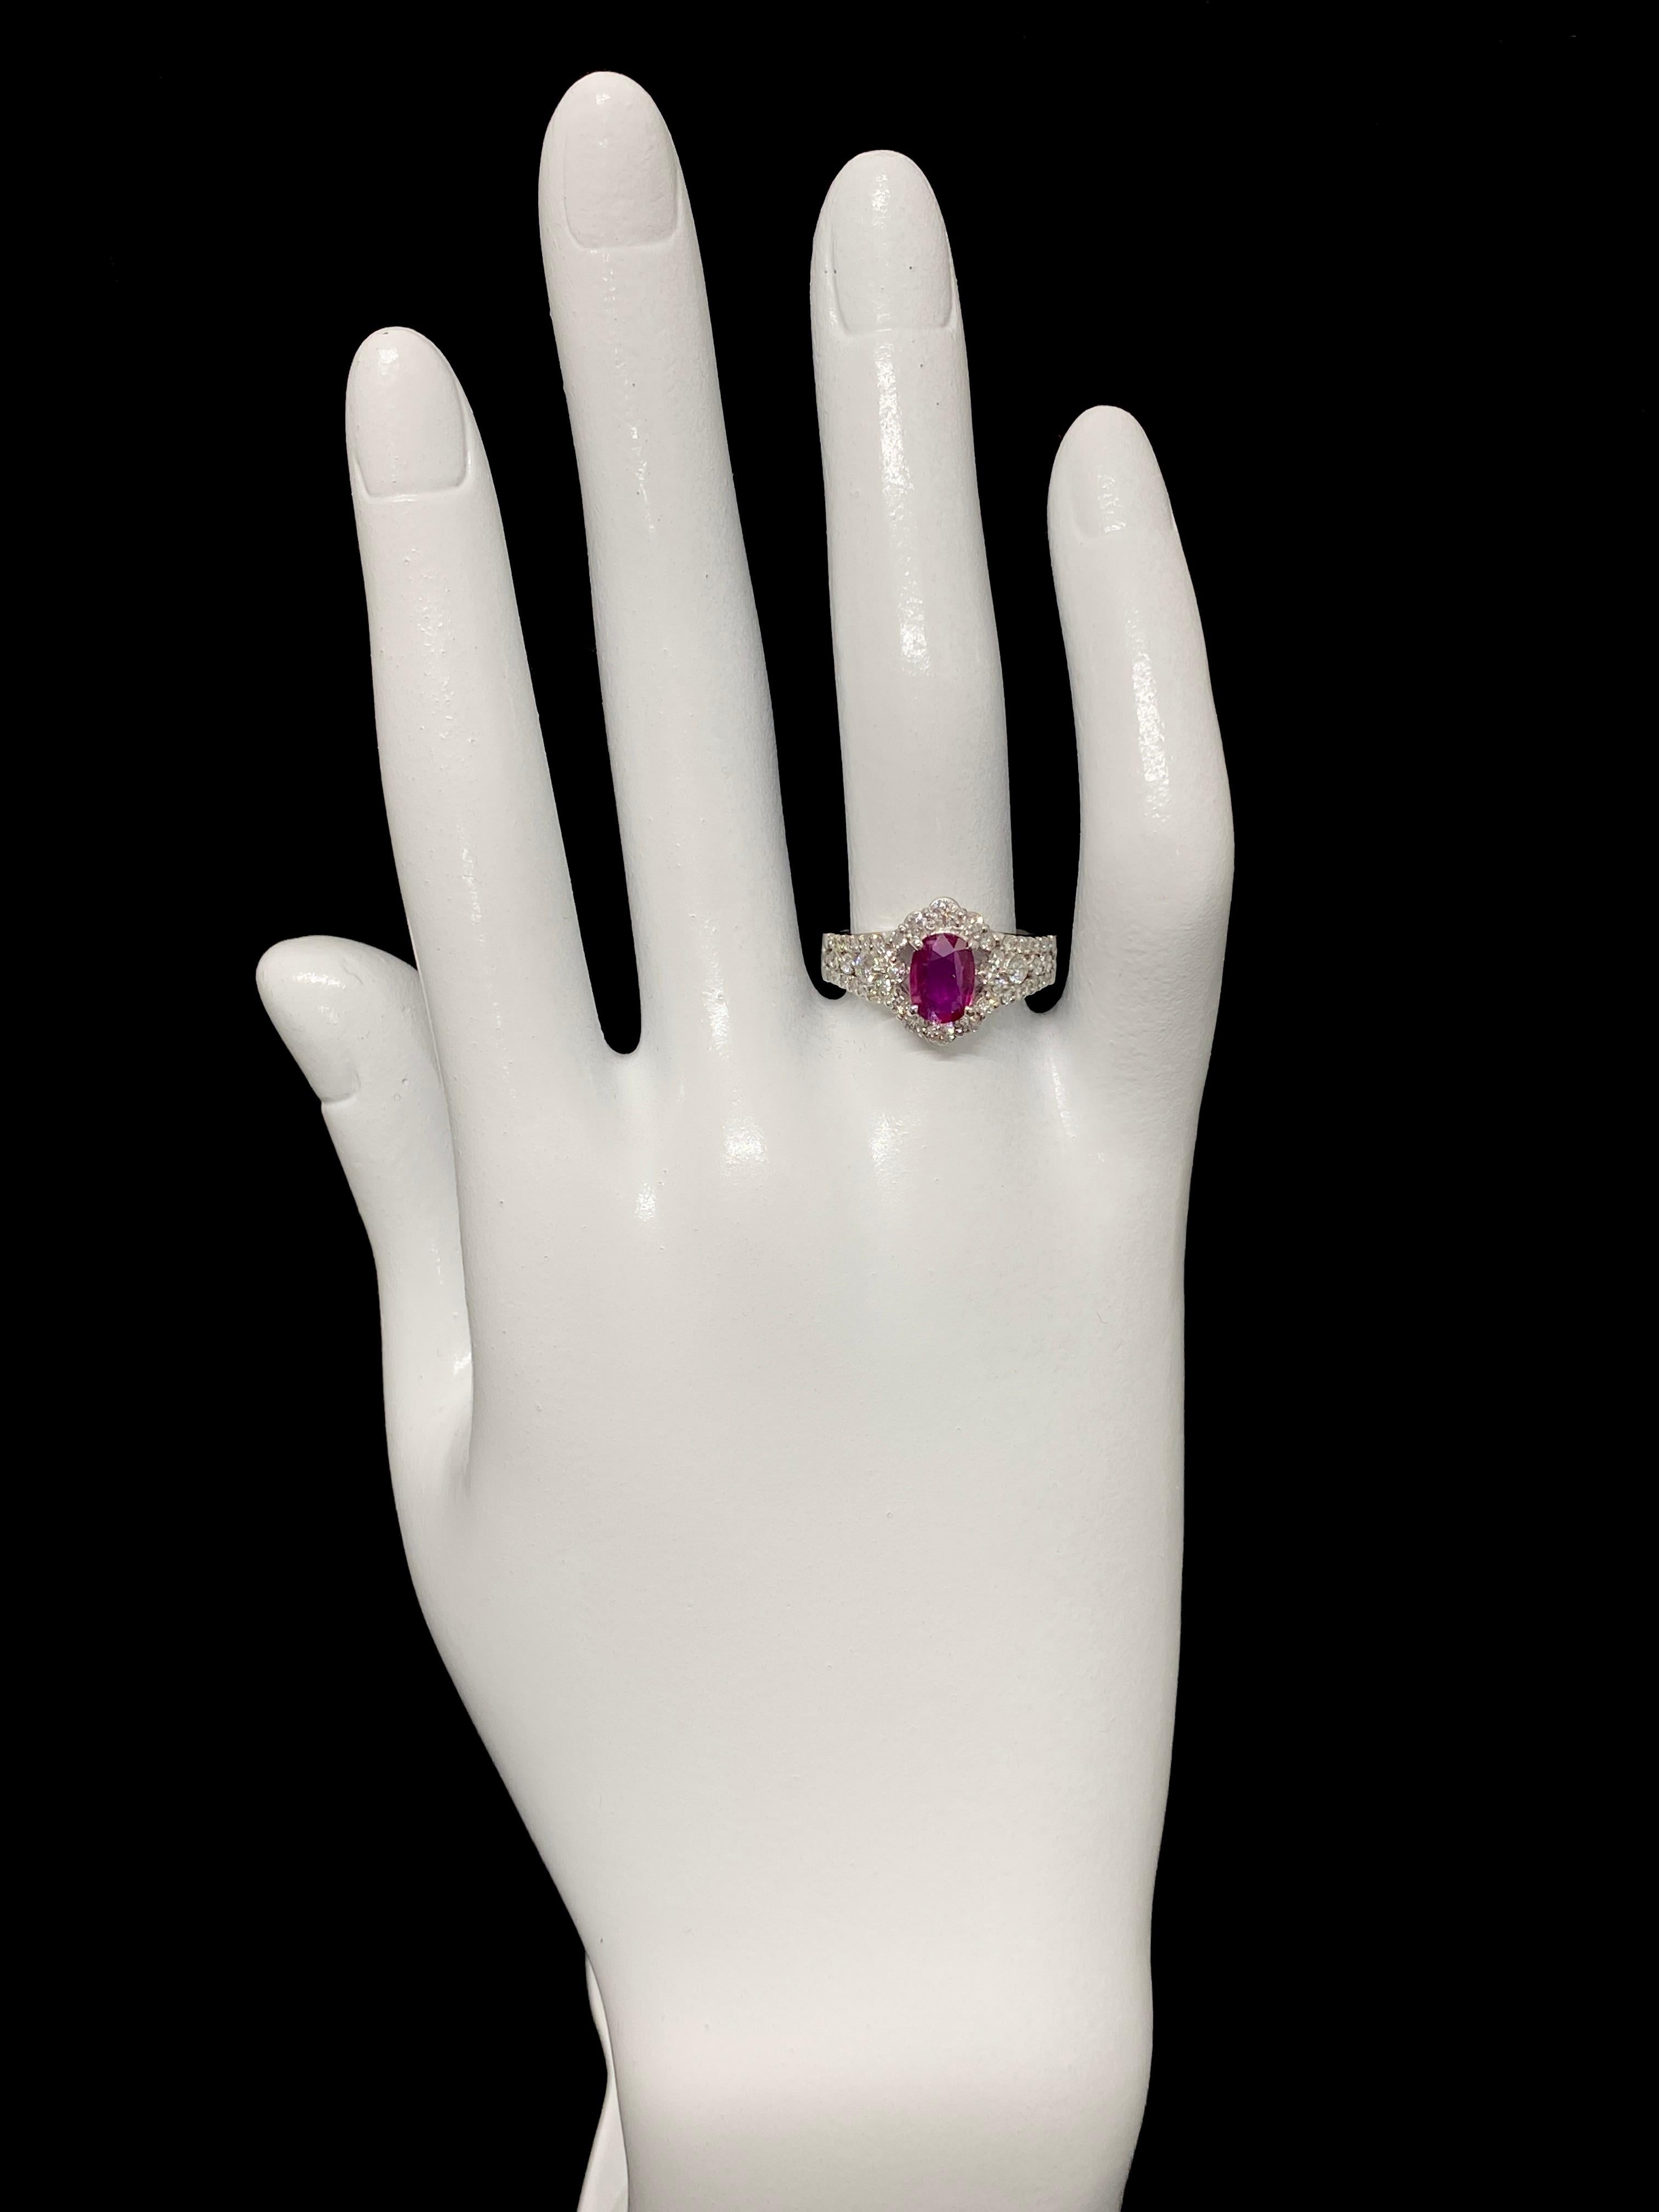 Edwardian GIA Certified 1.01 Carat Natural Unheated Ruby and Diamond Ring Set in Platinum